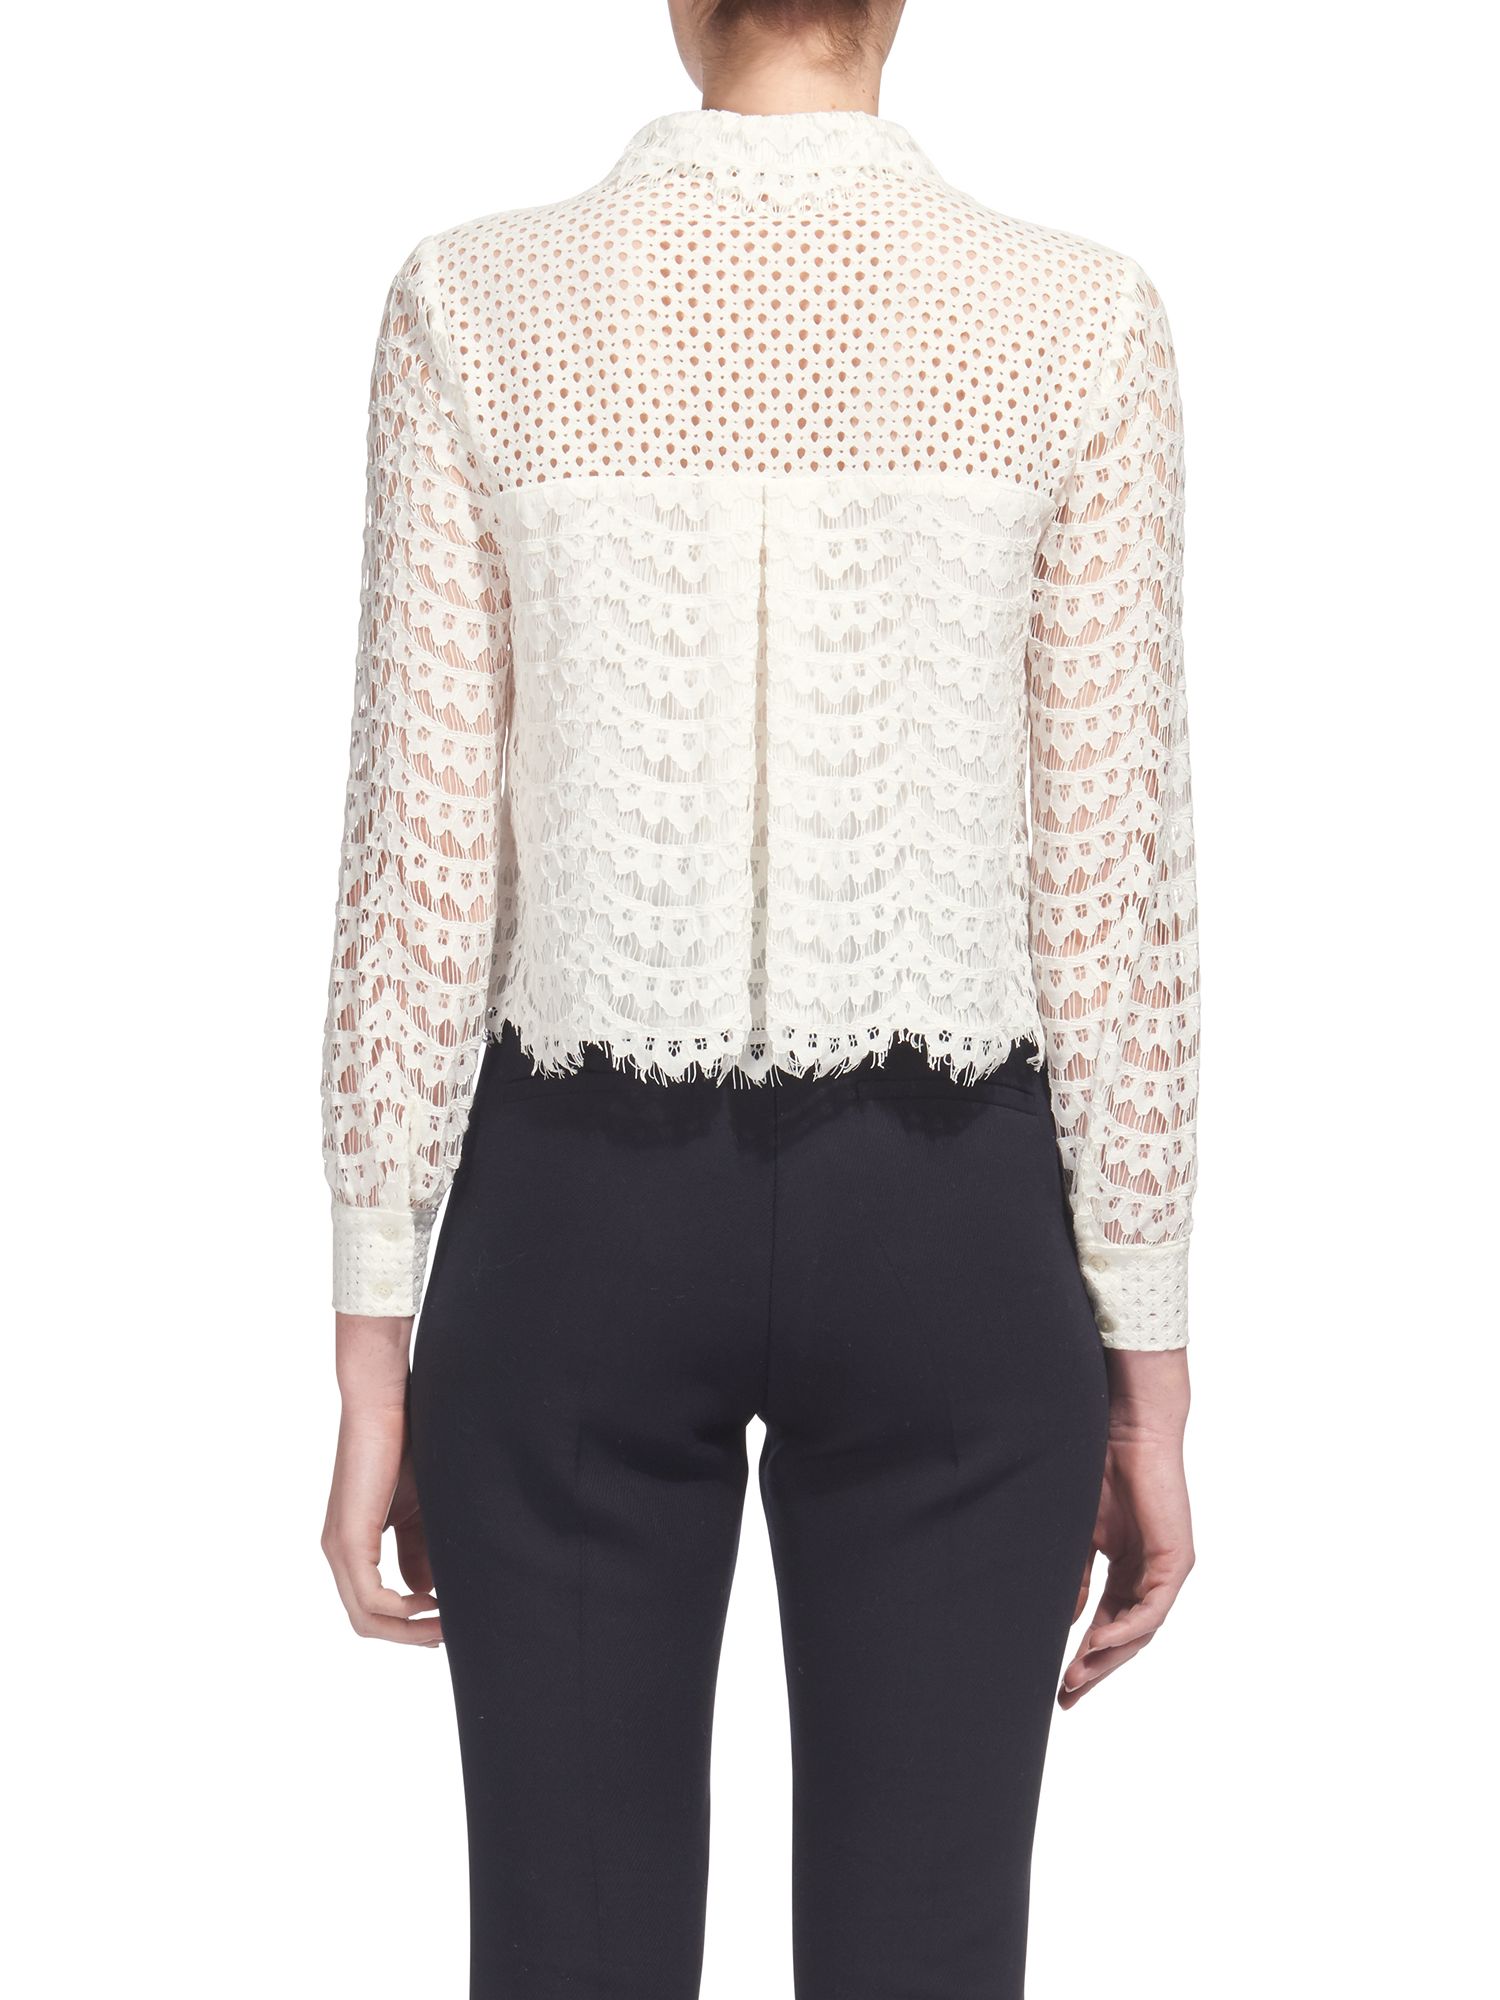 Whistles Penny Lace Top, Ivory at John Lewis & Partners